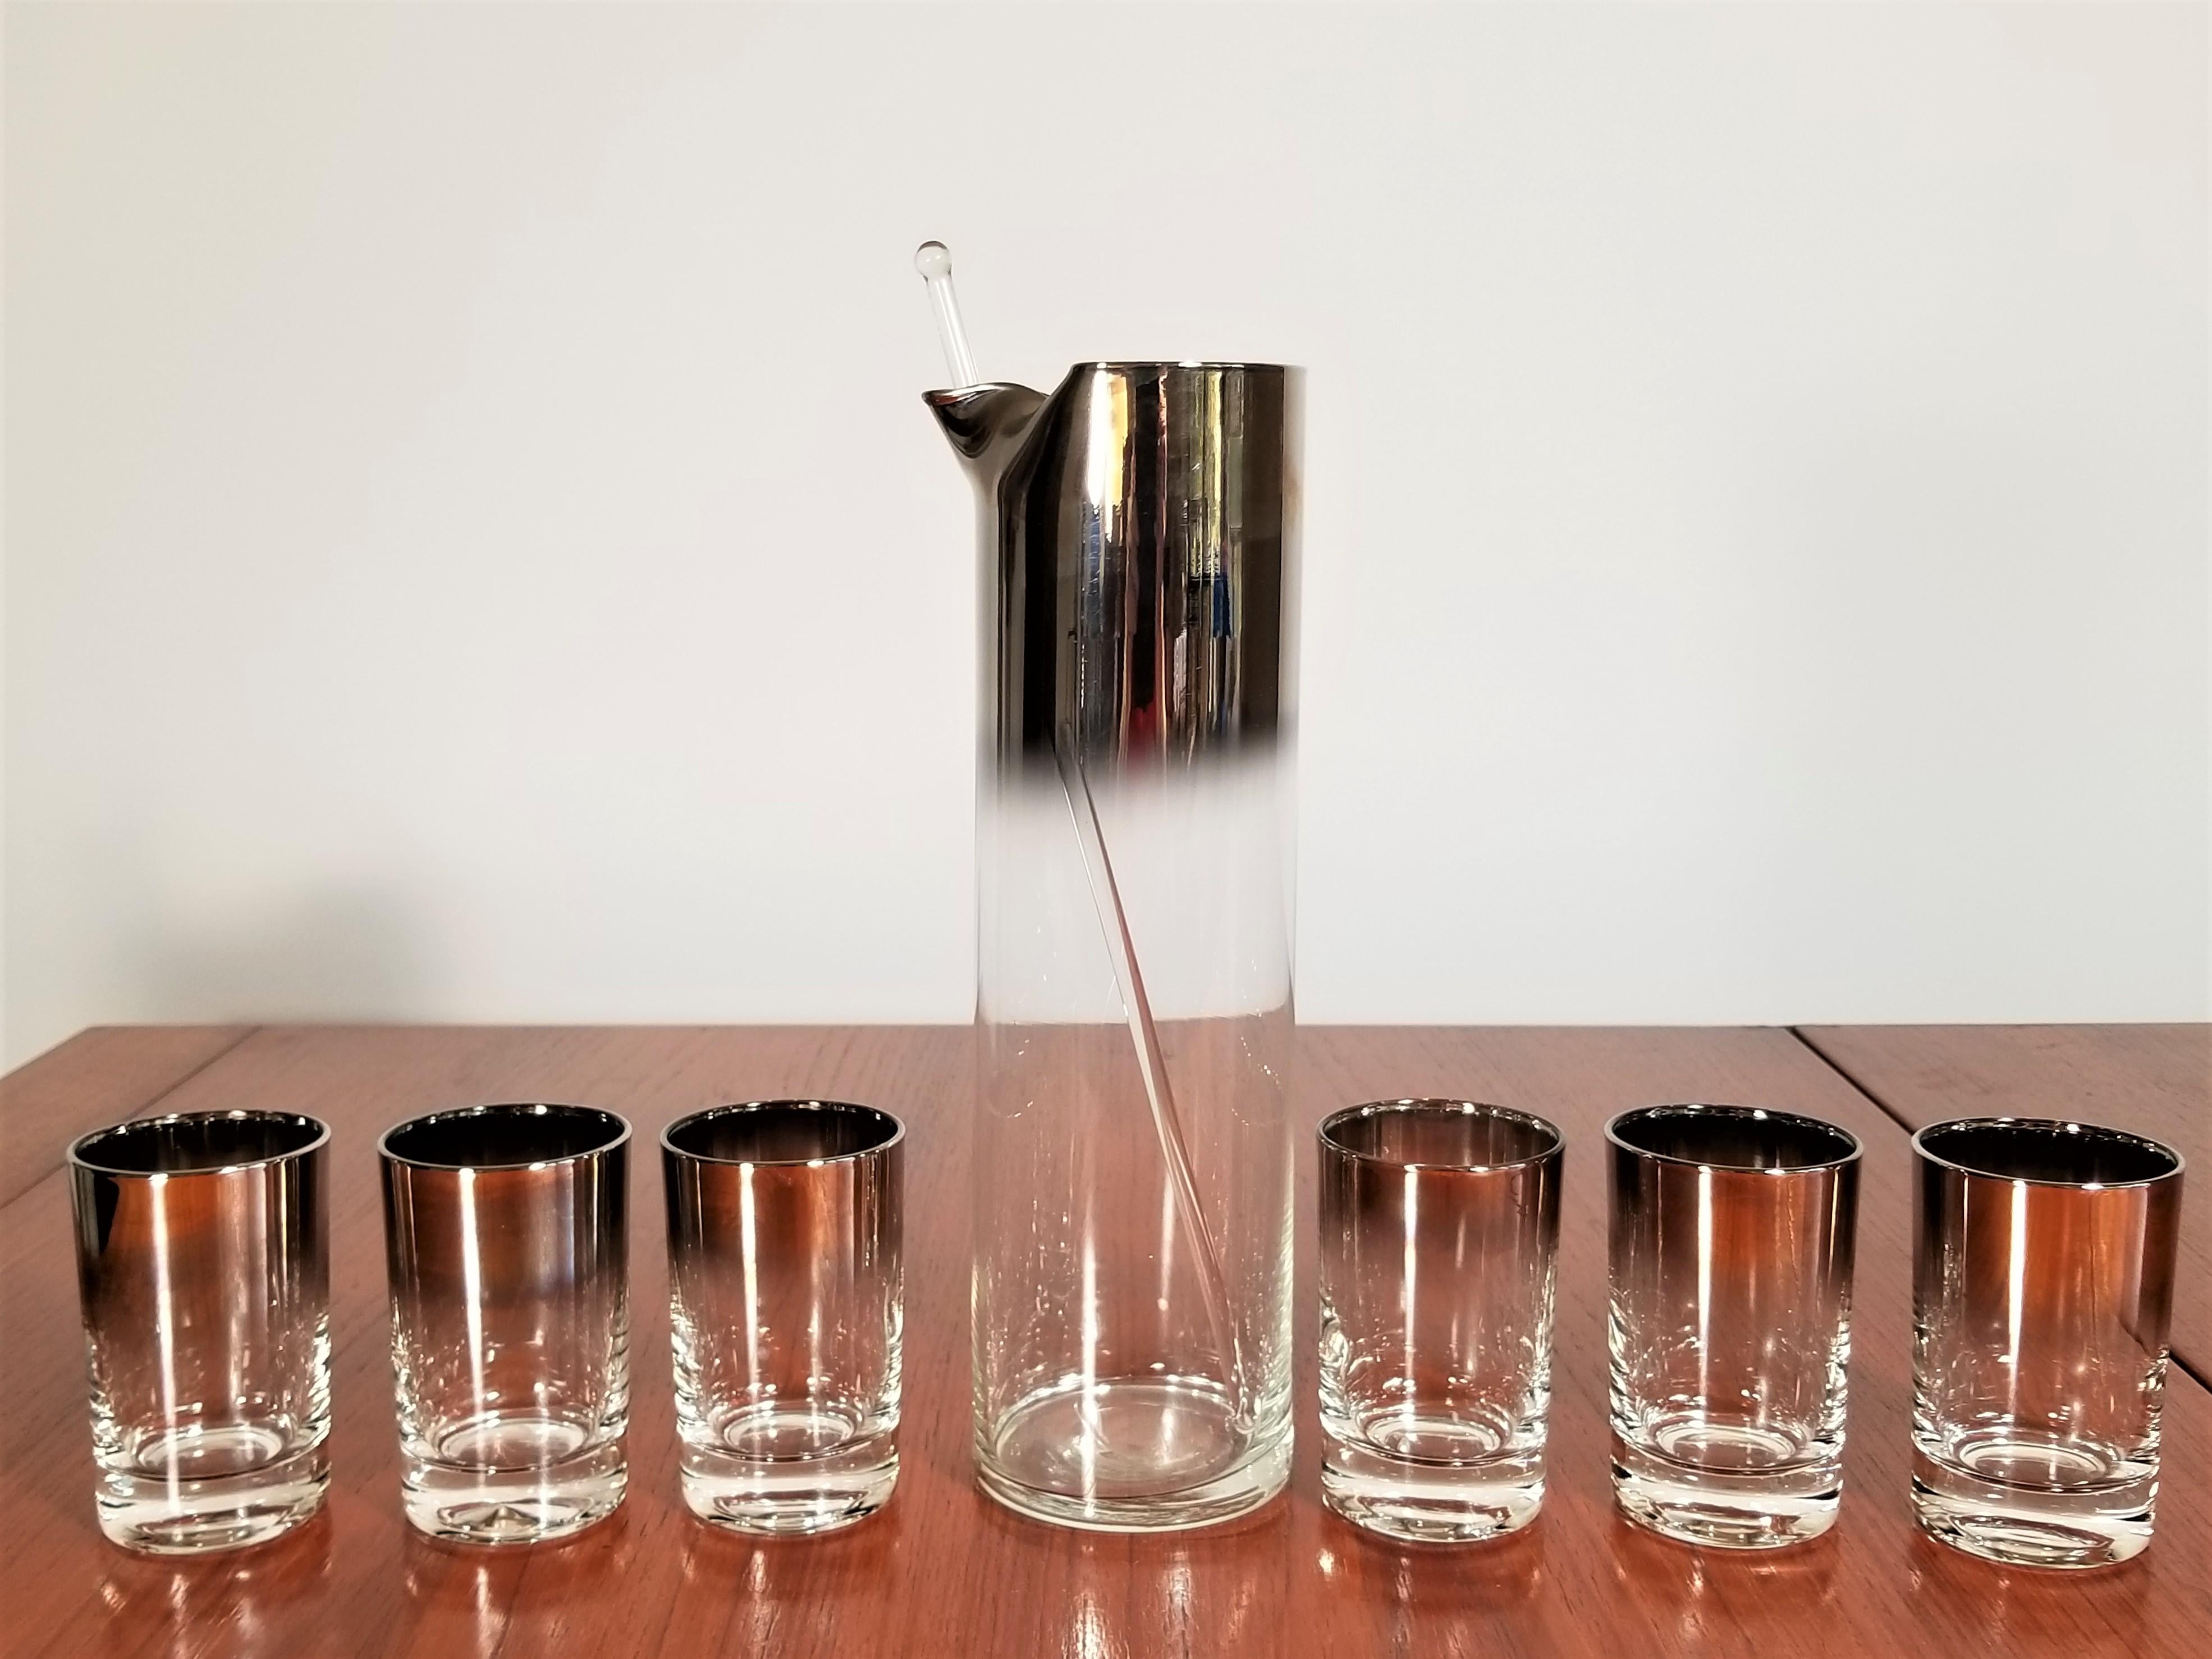 Midcentury silver glass bar set attributed to Dorothy Thorpe. Silver Fade.
One martini pitcher 10.5 x 3 inches
One glass stirrer 12 inches
Six glasses 3 x 2.25 inches.